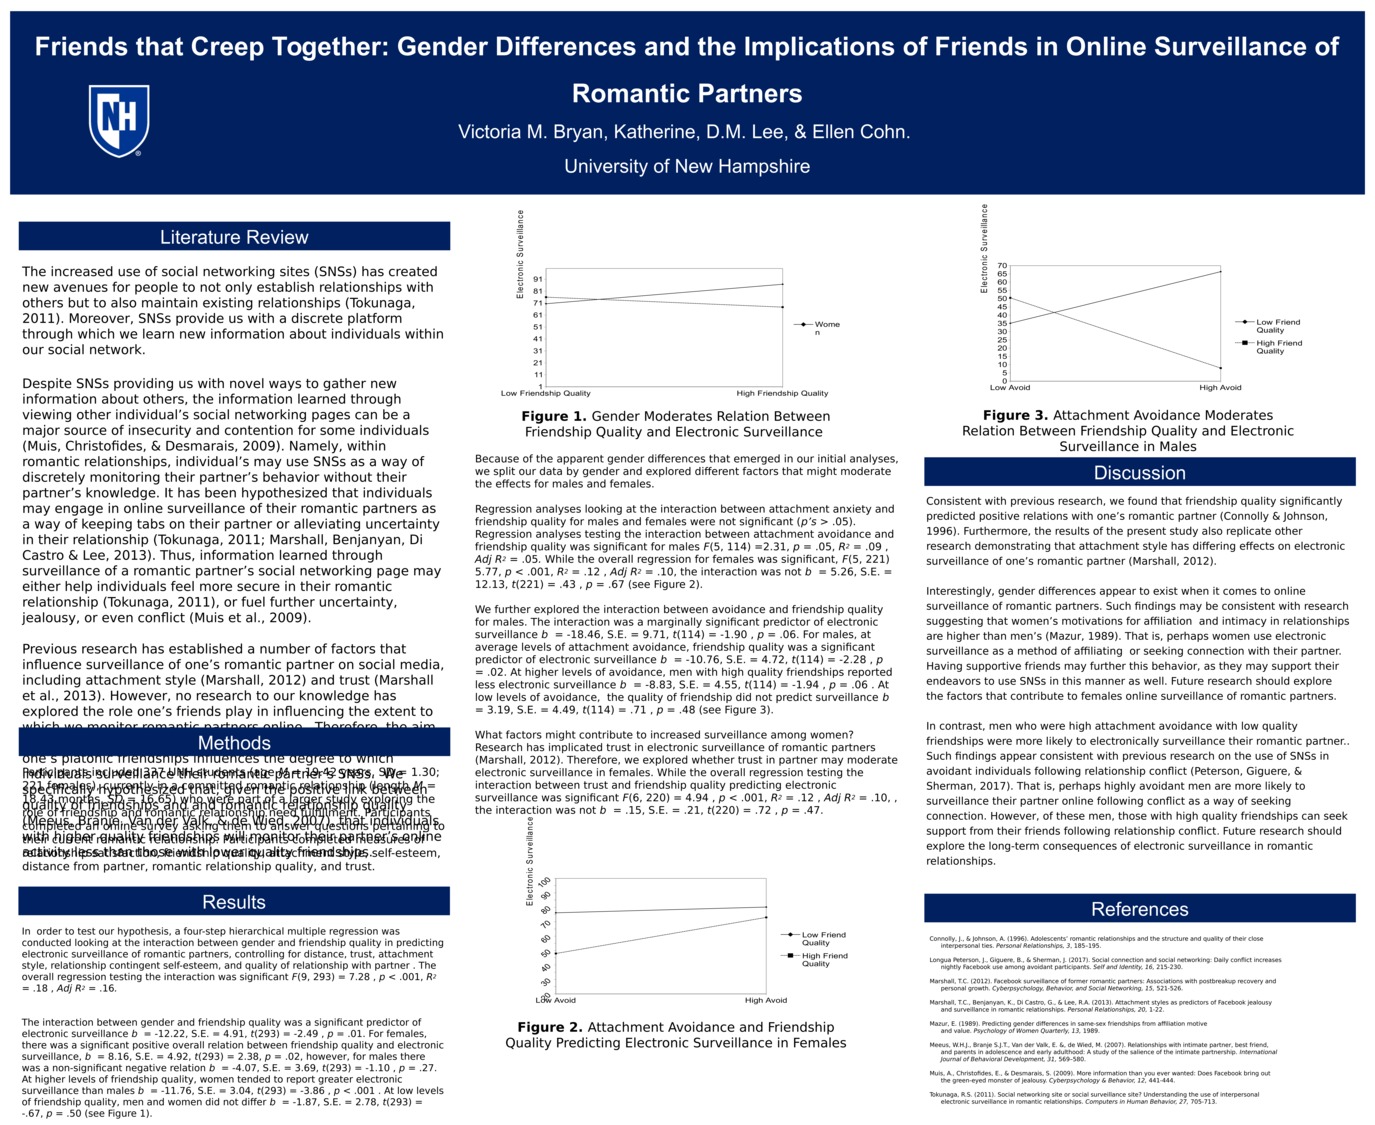 Friends That Creep Together: Gender Differences And The Implications Of Friends In Online Surveillance Of Romantic Partners by vmb1007